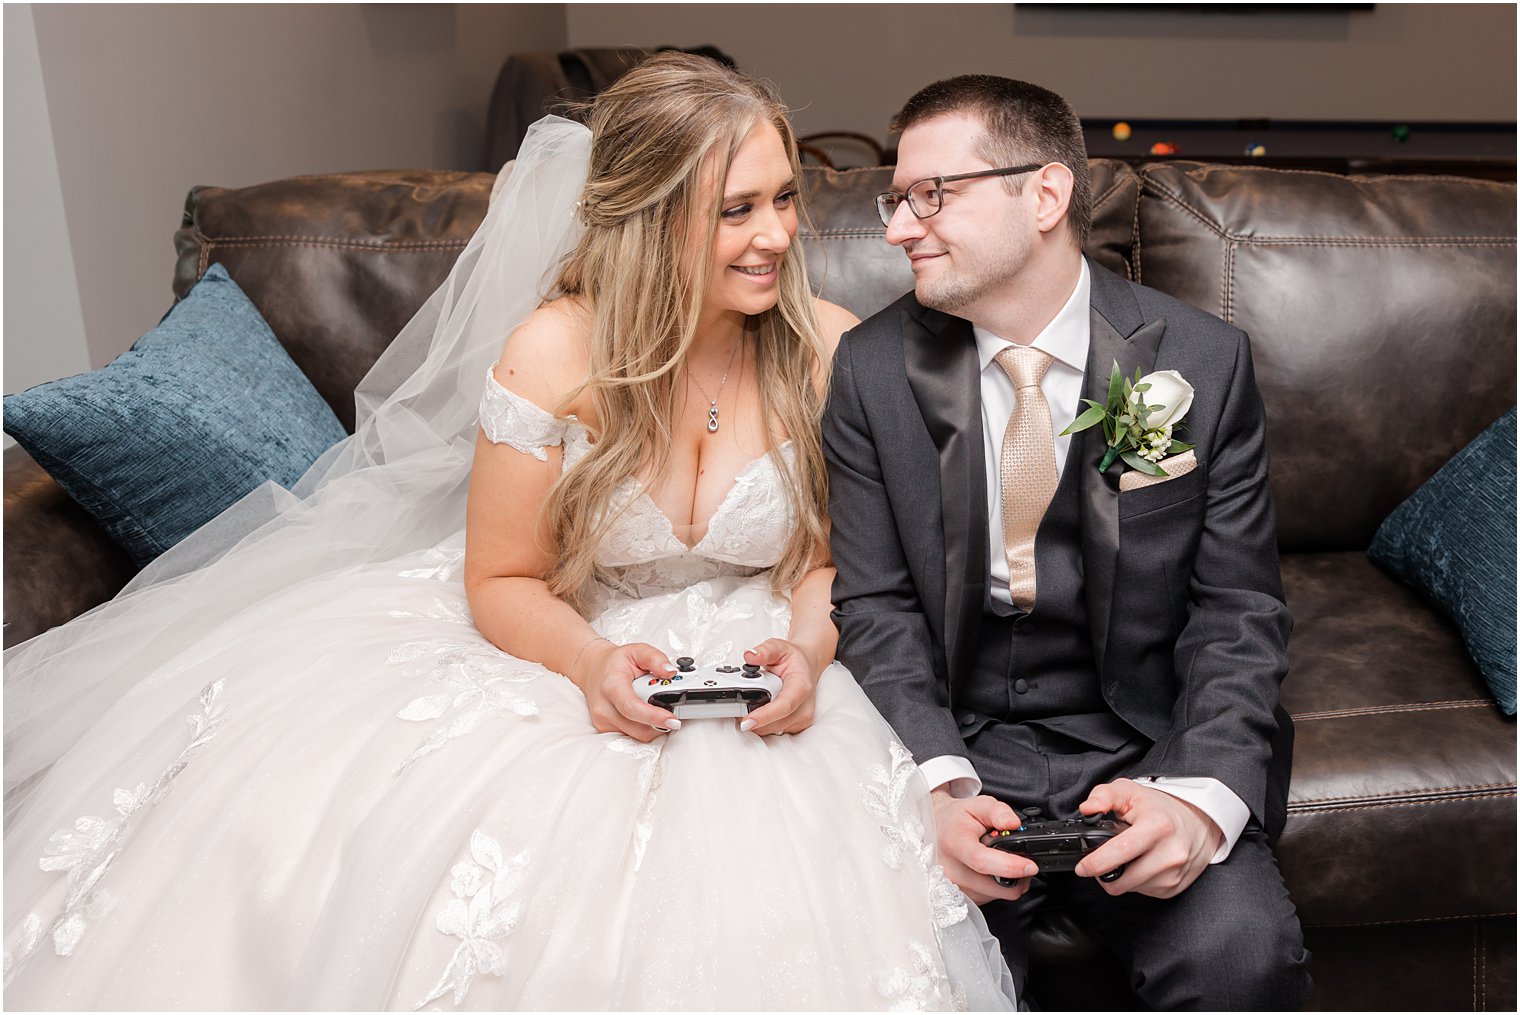 newlyweds sit on leather couch with gaming controllers